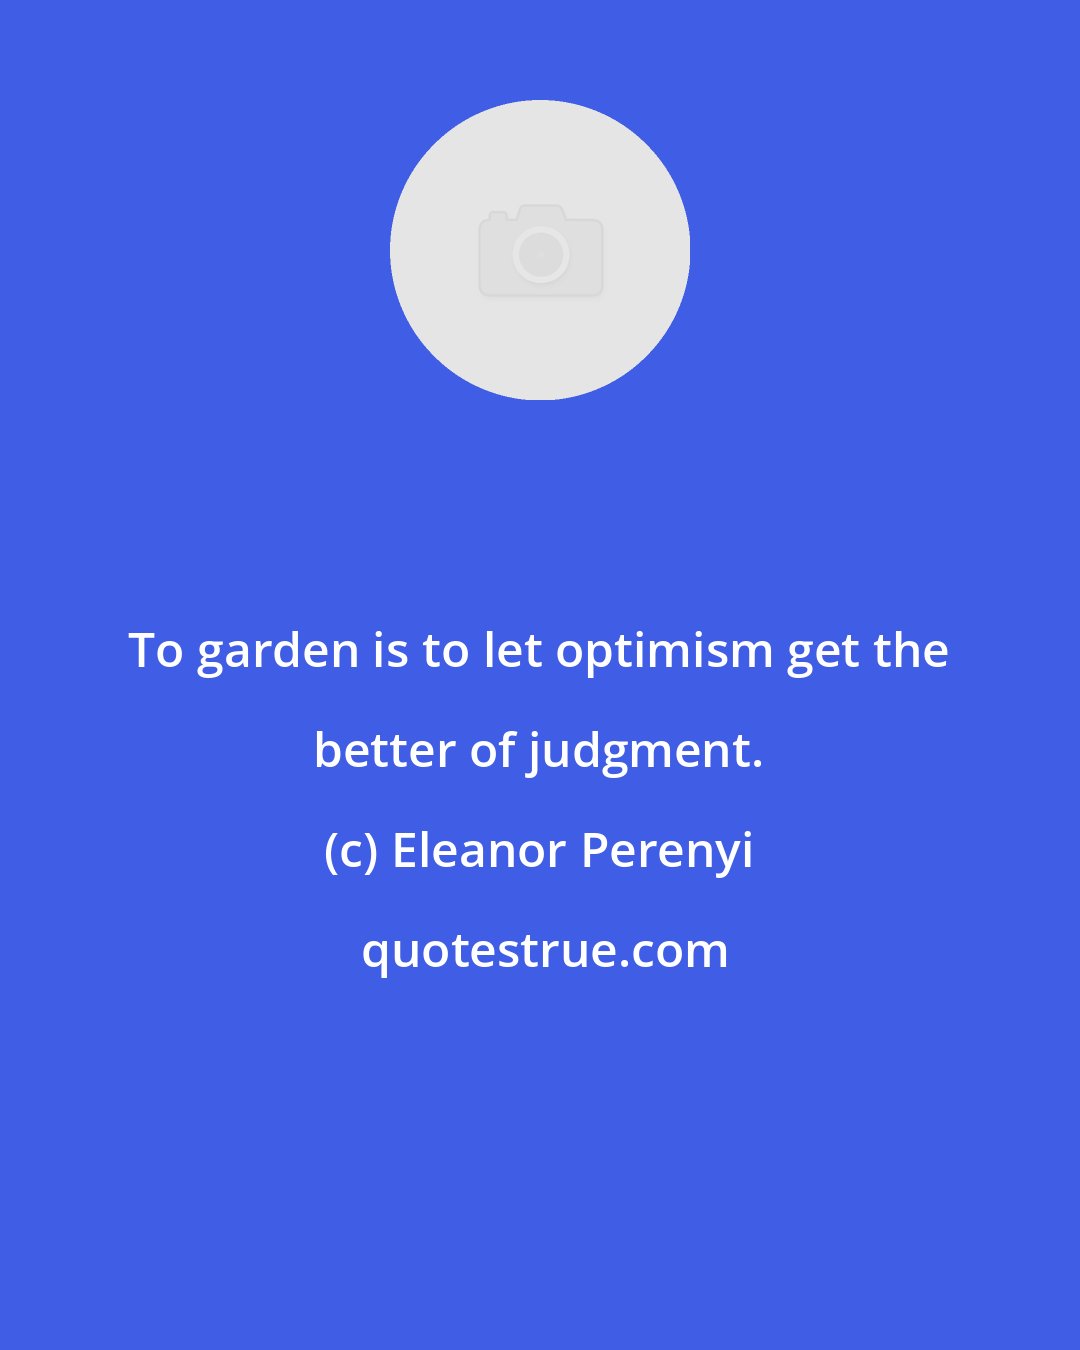 Eleanor Perenyi: To garden is to let optimism get the better of judgment.